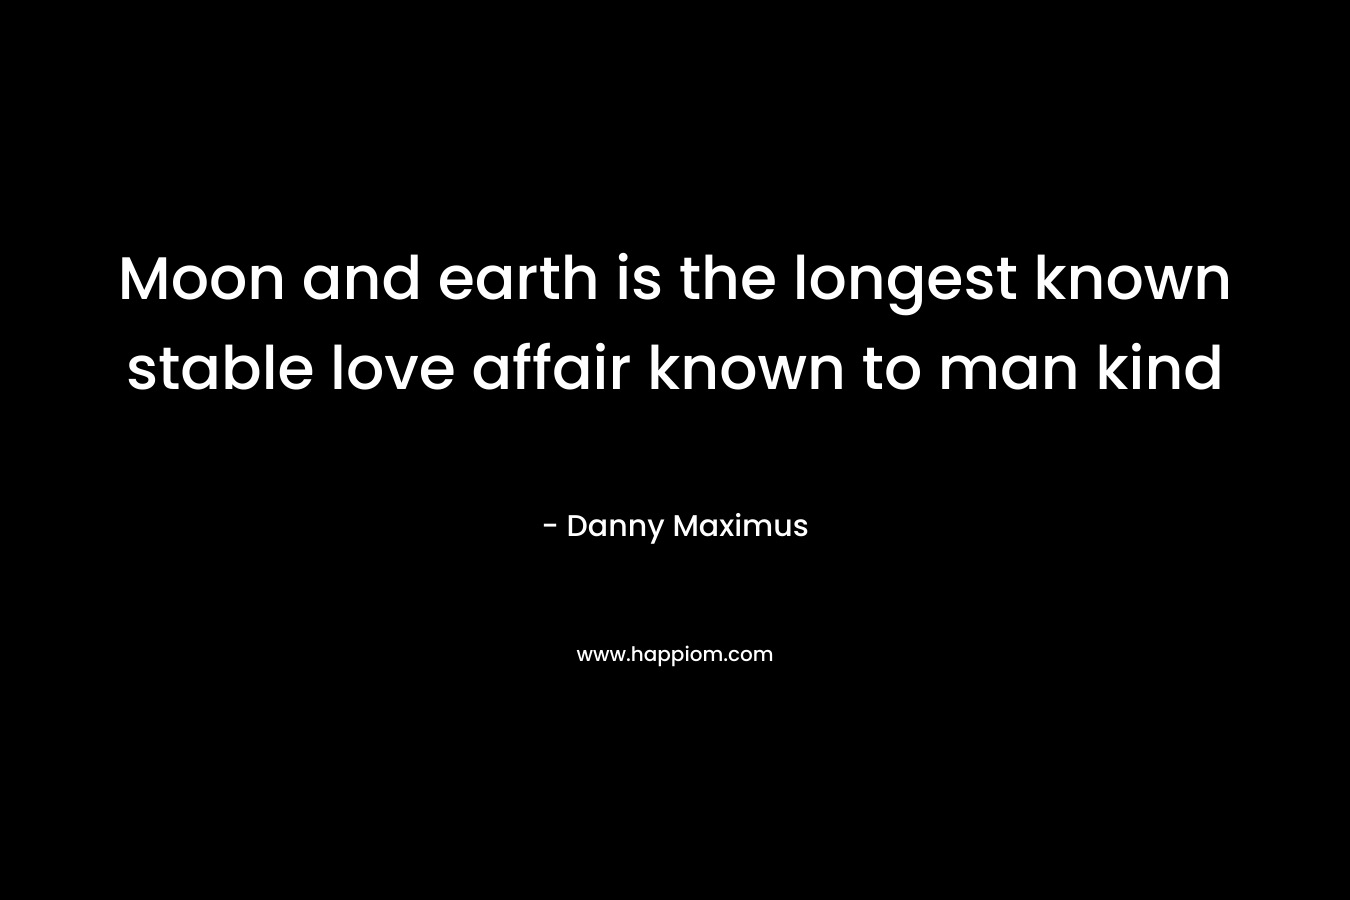 Moon and earth is the longest known stable love affair known to man kind